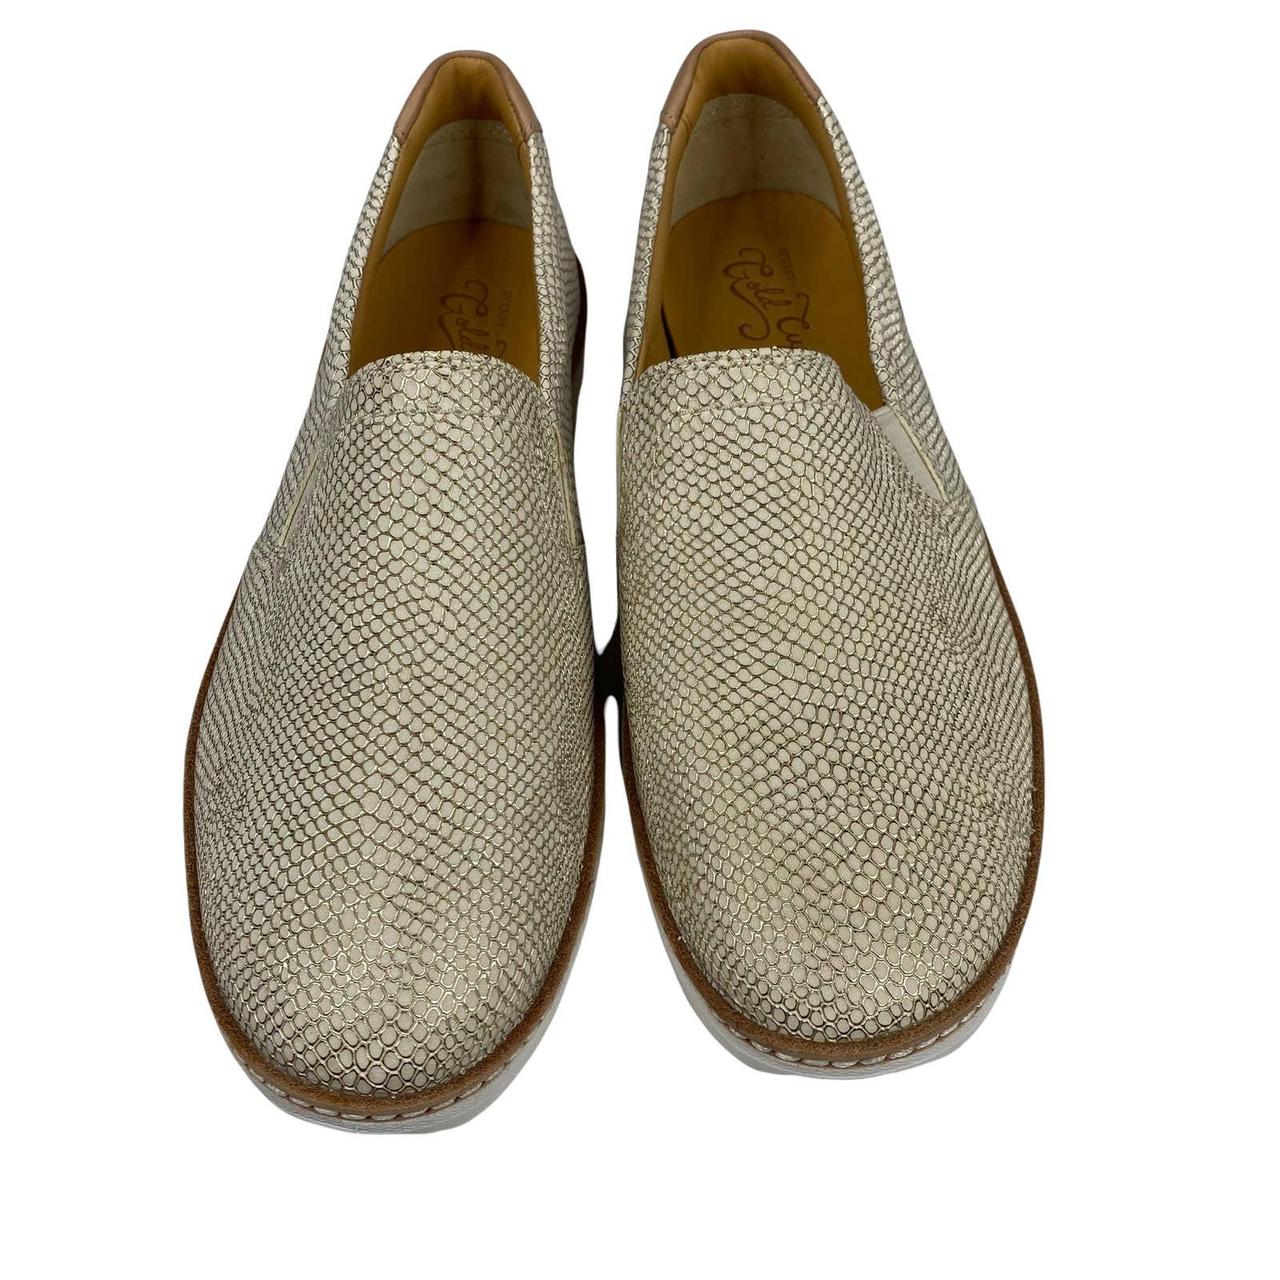 Sperry Women's White and Gold Loafers (2)